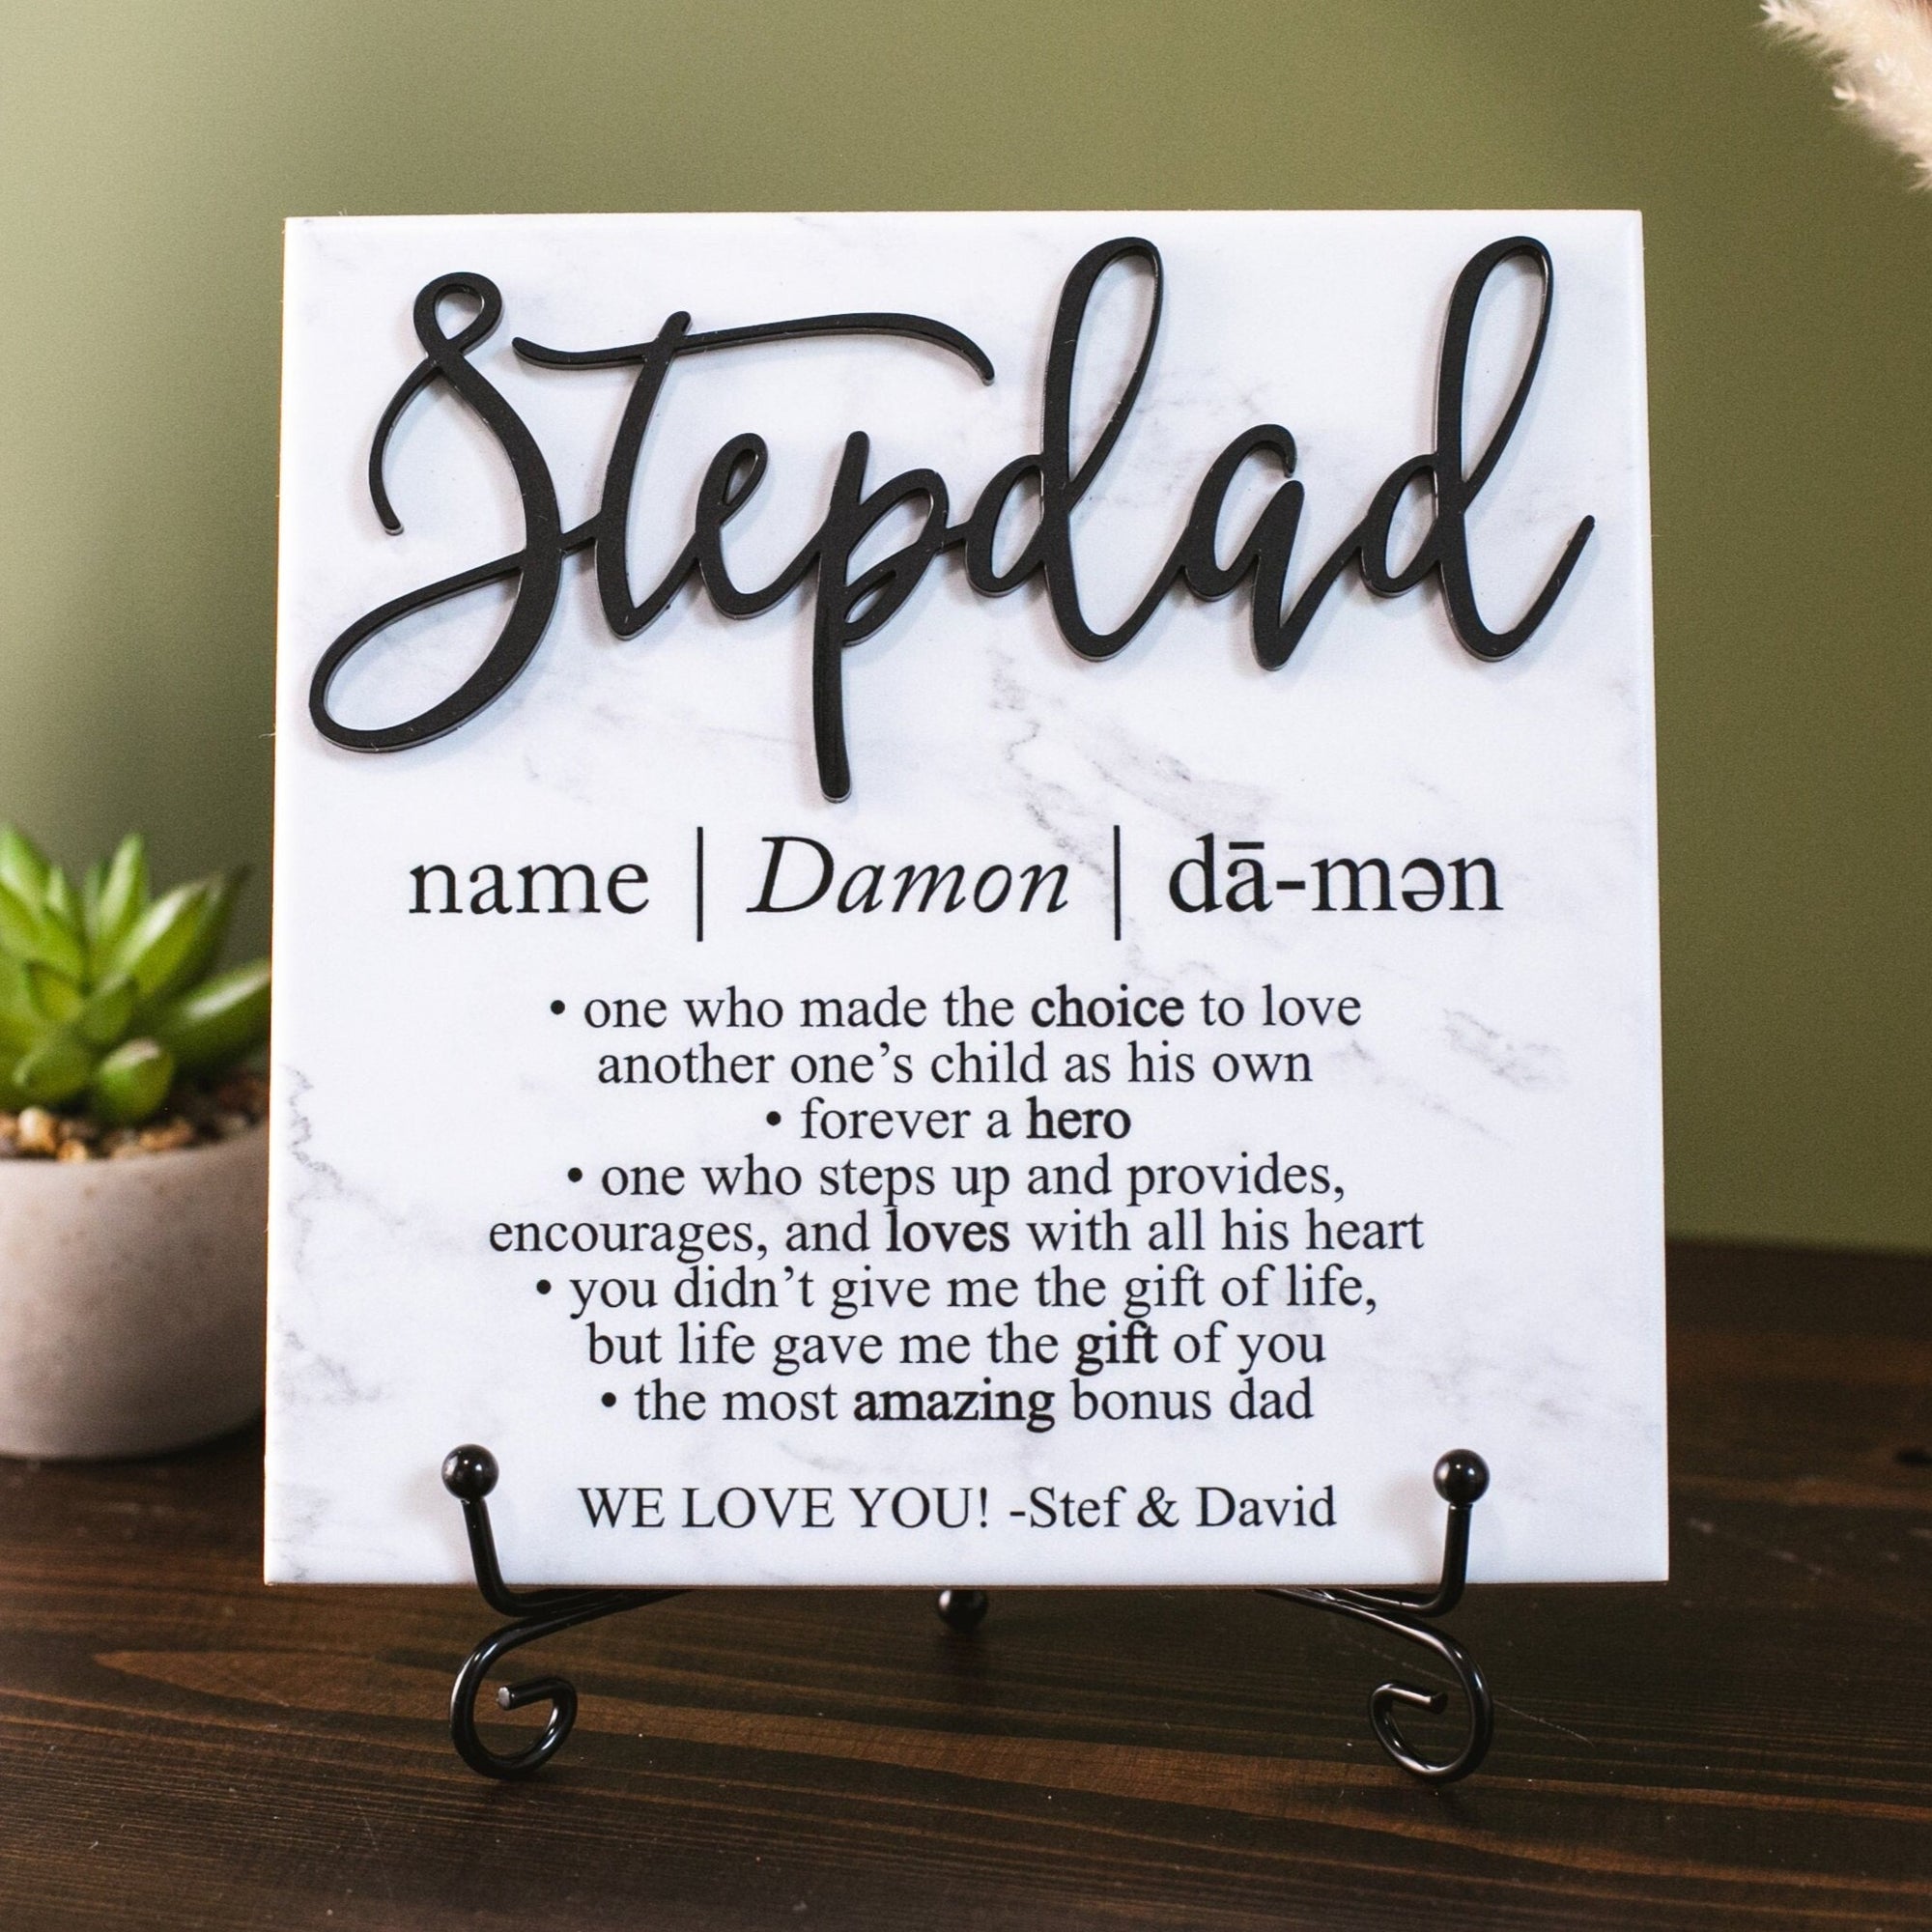 3D Stepdad Definition Ceramic Tile Sign Gift, Fathers Day Family Present Idea, Wall Decor, Dad, Papa, Grill Master + Grandpa Also Available